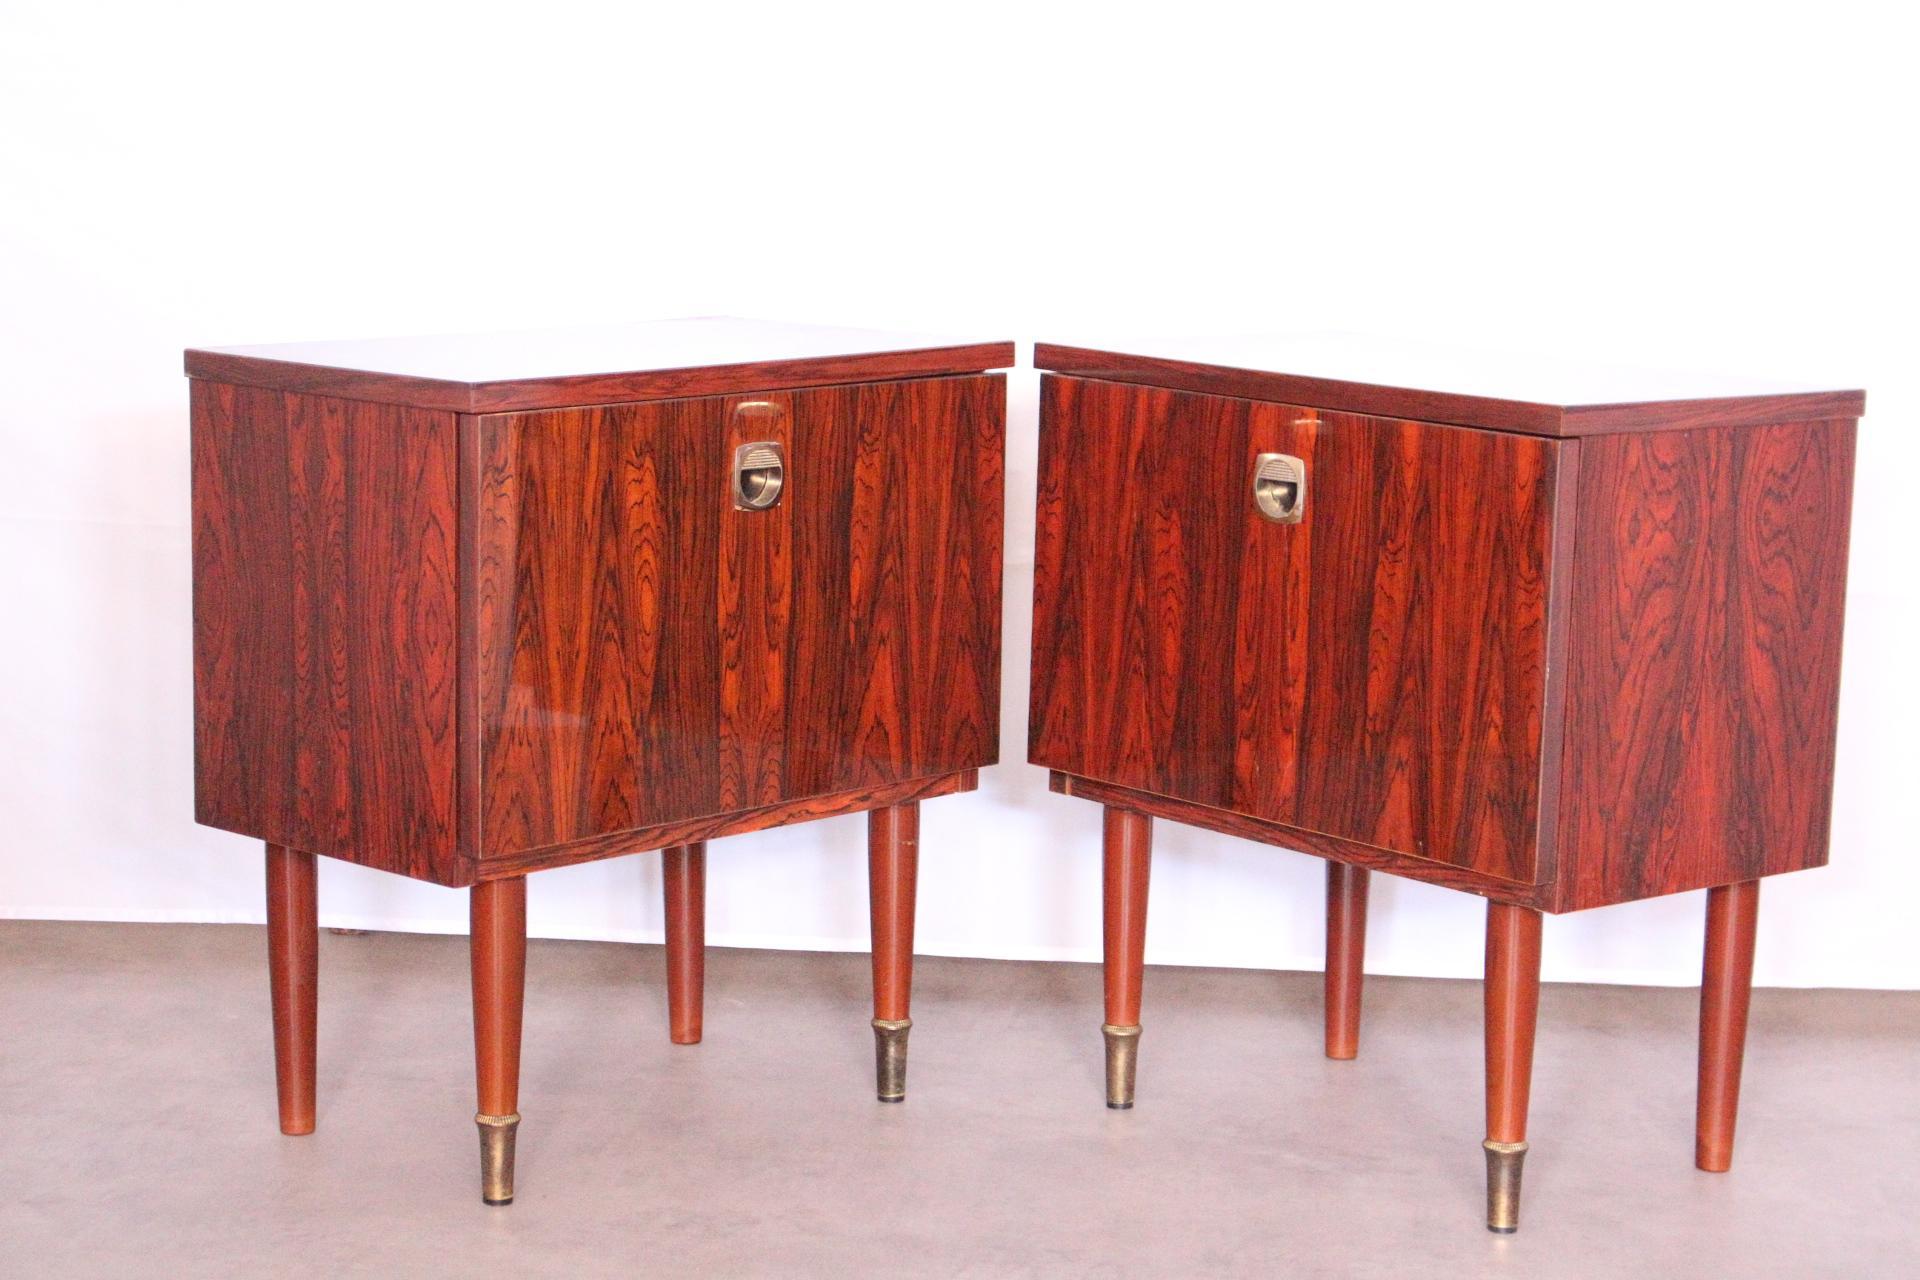 Pair of French side cabinet midcentury, circa 1970
Nightstands 
Stratified high shine wood with faux kingwood effect finish
Brass feet
Drop fronts
Good vintage condition with only very minor marks of use for their age.